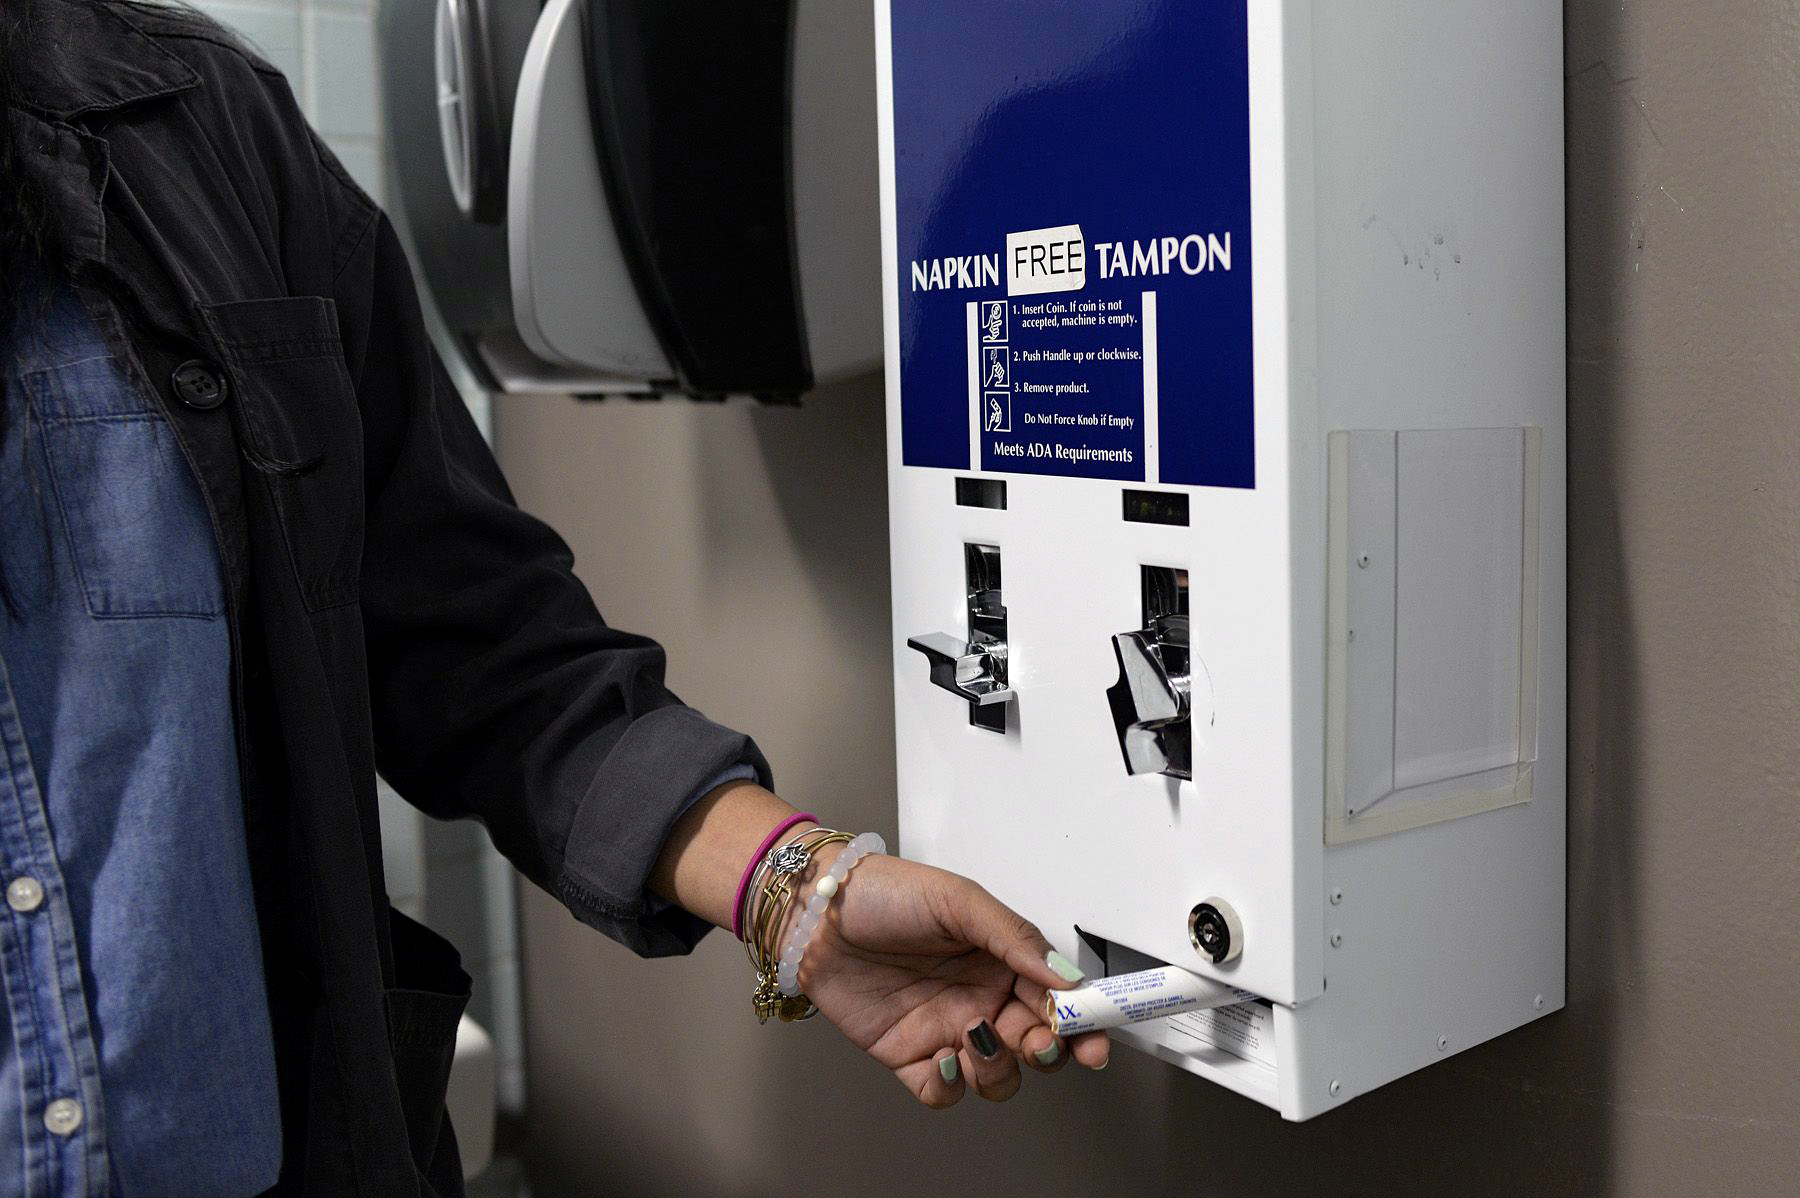 A woman reaches for a free tampon from a dispenser in a school restroom.